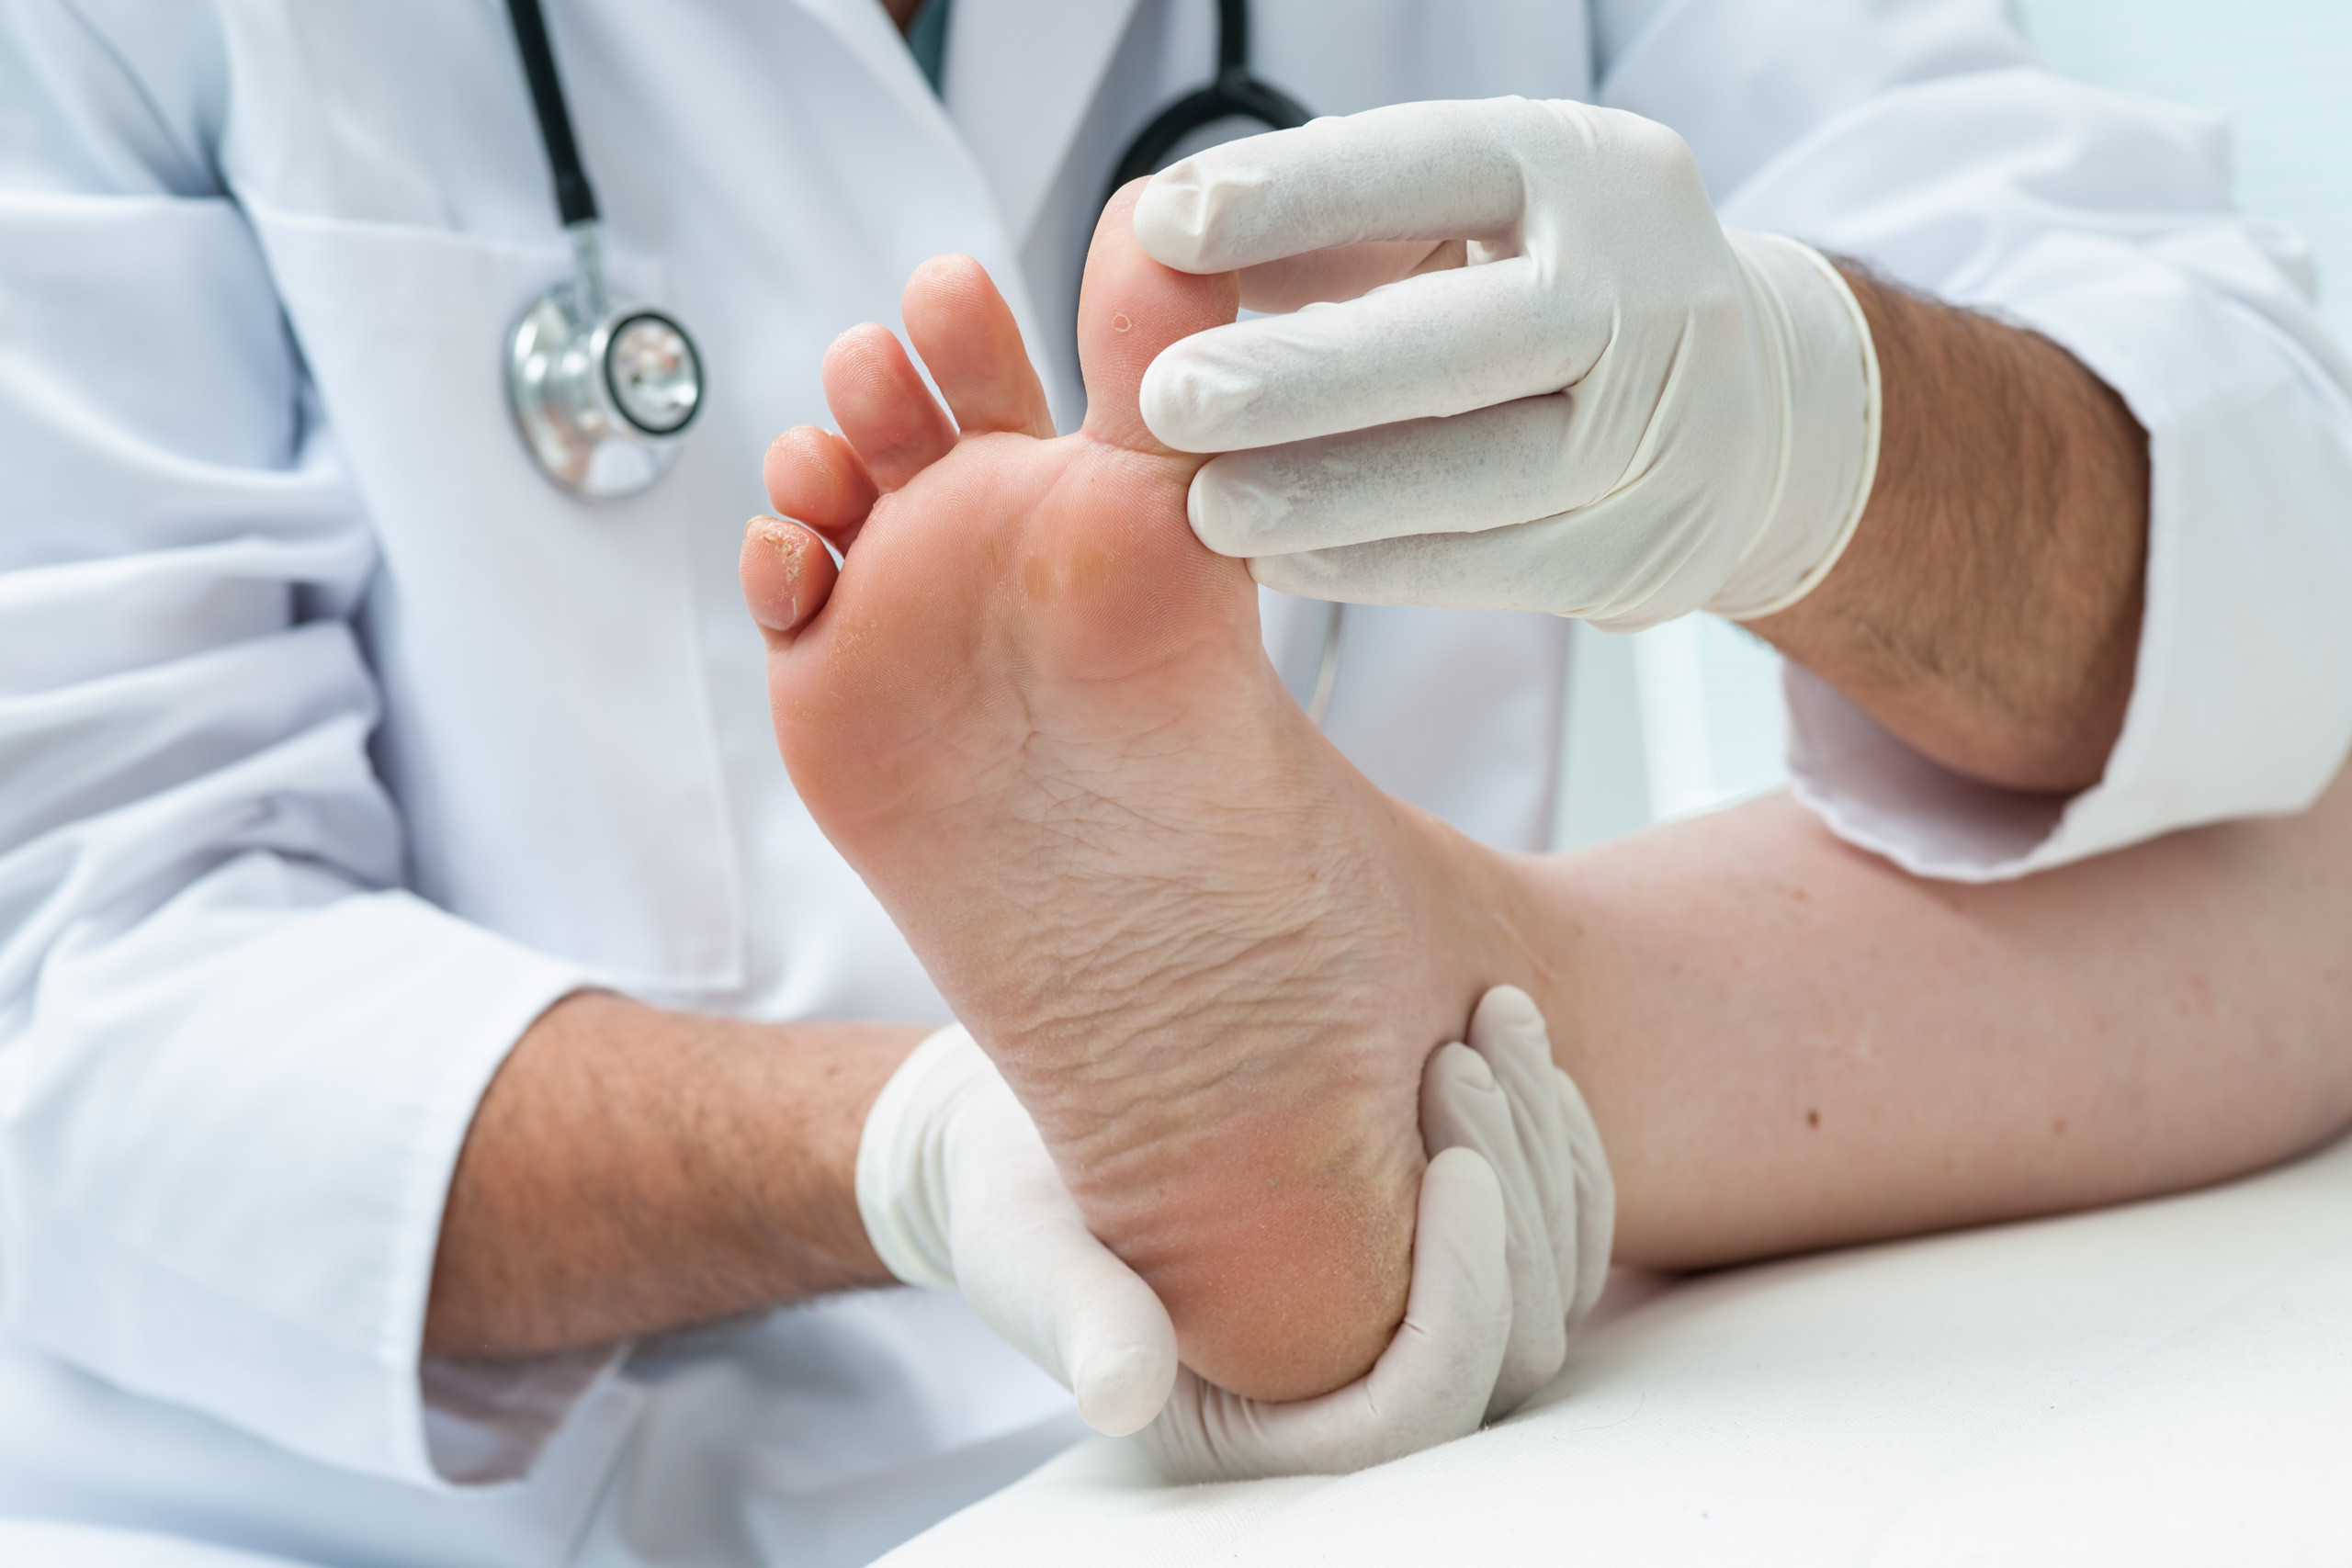 Has Your Big Toenail Stopped Growing and Hurts?